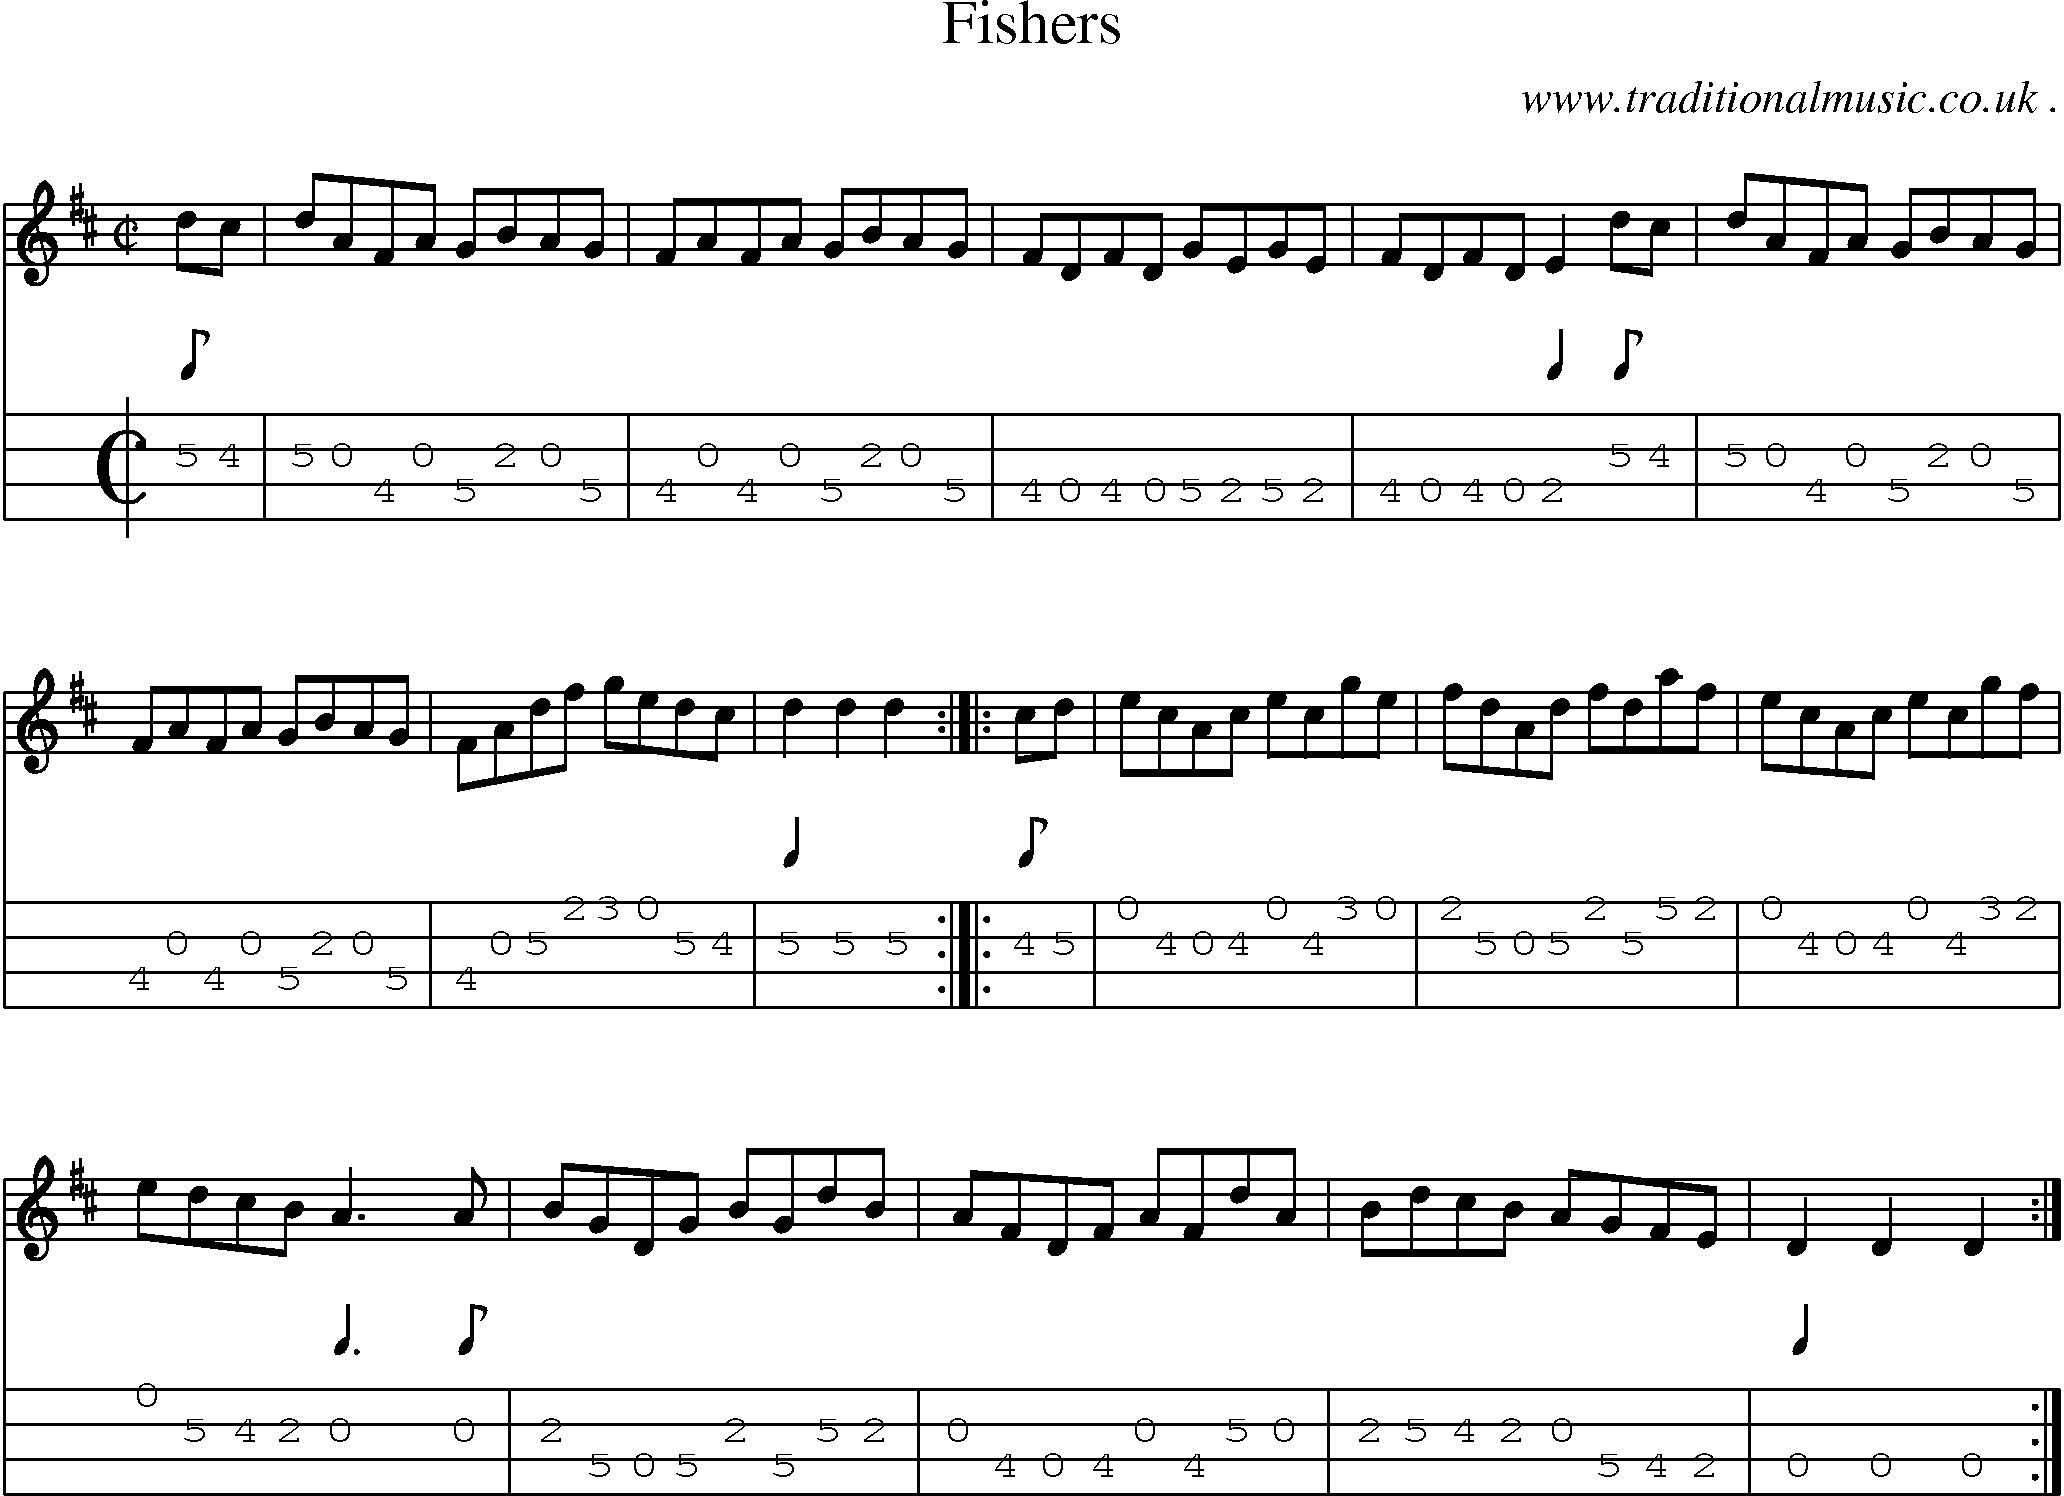 Sheet-music  score, Chords and Mandolin Tabs for Fishers